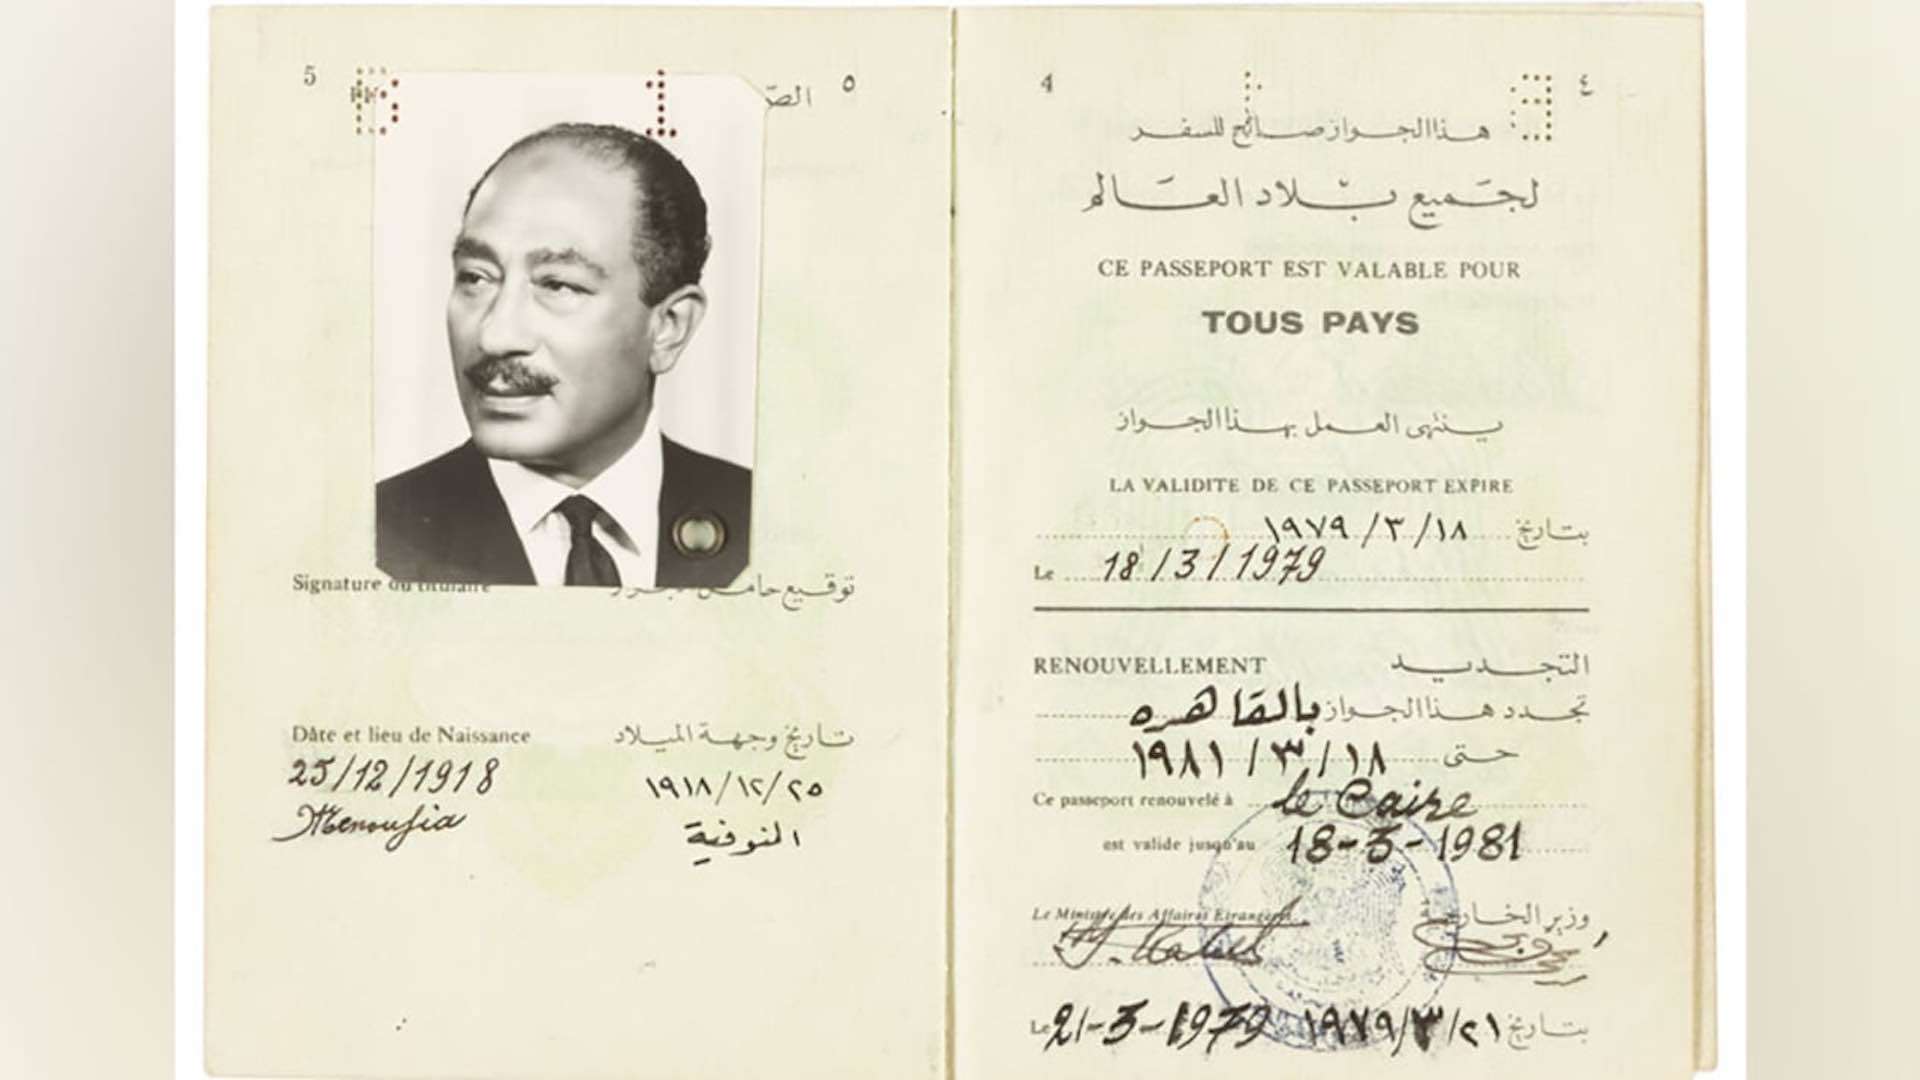 Sadat family outraged by passport sale in Texas